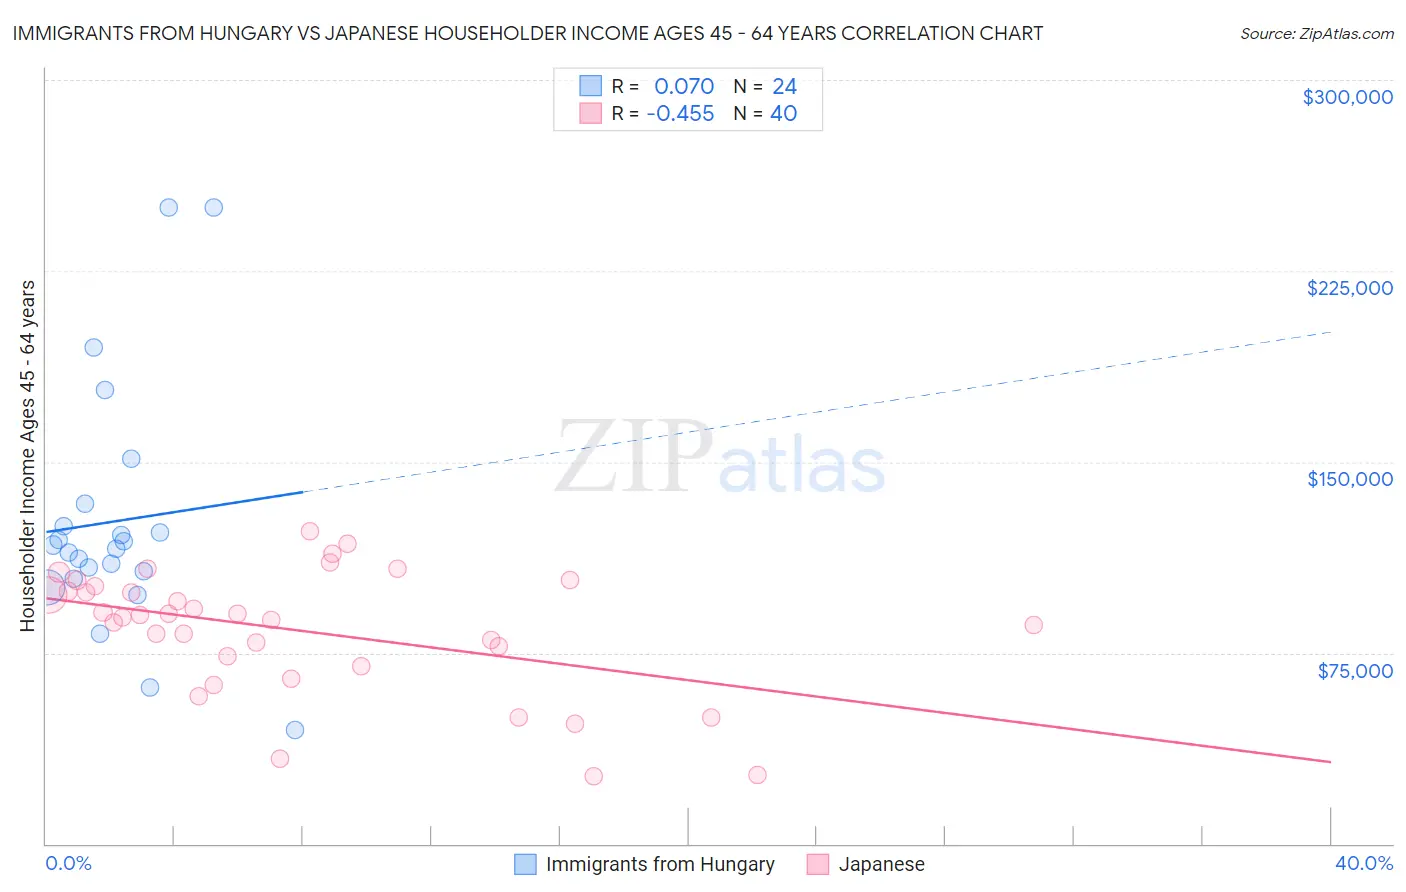 Immigrants from Hungary vs Japanese Householder Income Ages 45 - 64 years